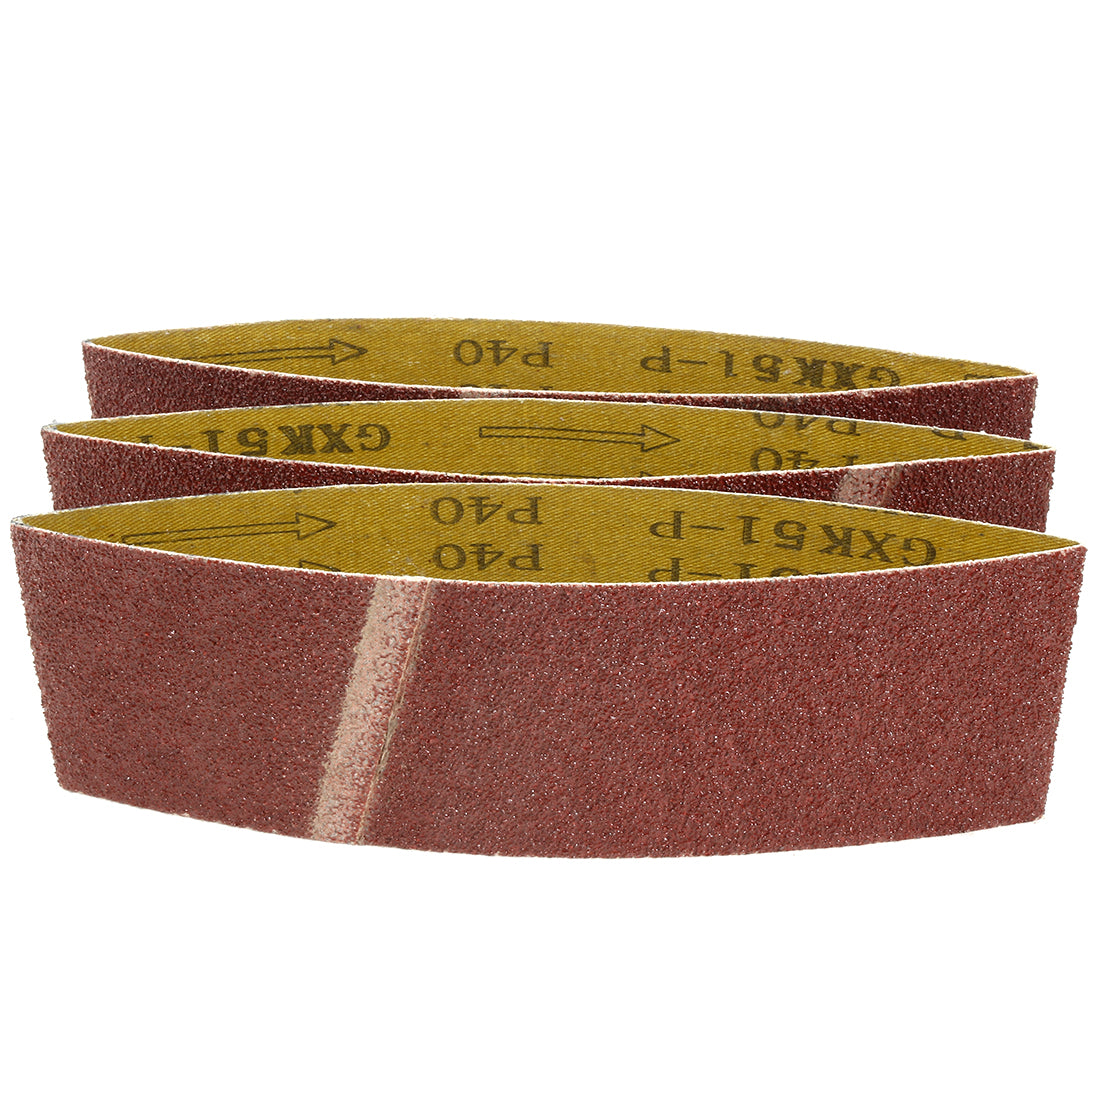 uxcell Uxcell 3-Inch x 18-Inch Aluminum Oxide Sanding Belt 40 Grits Lapped Joint 3pcs